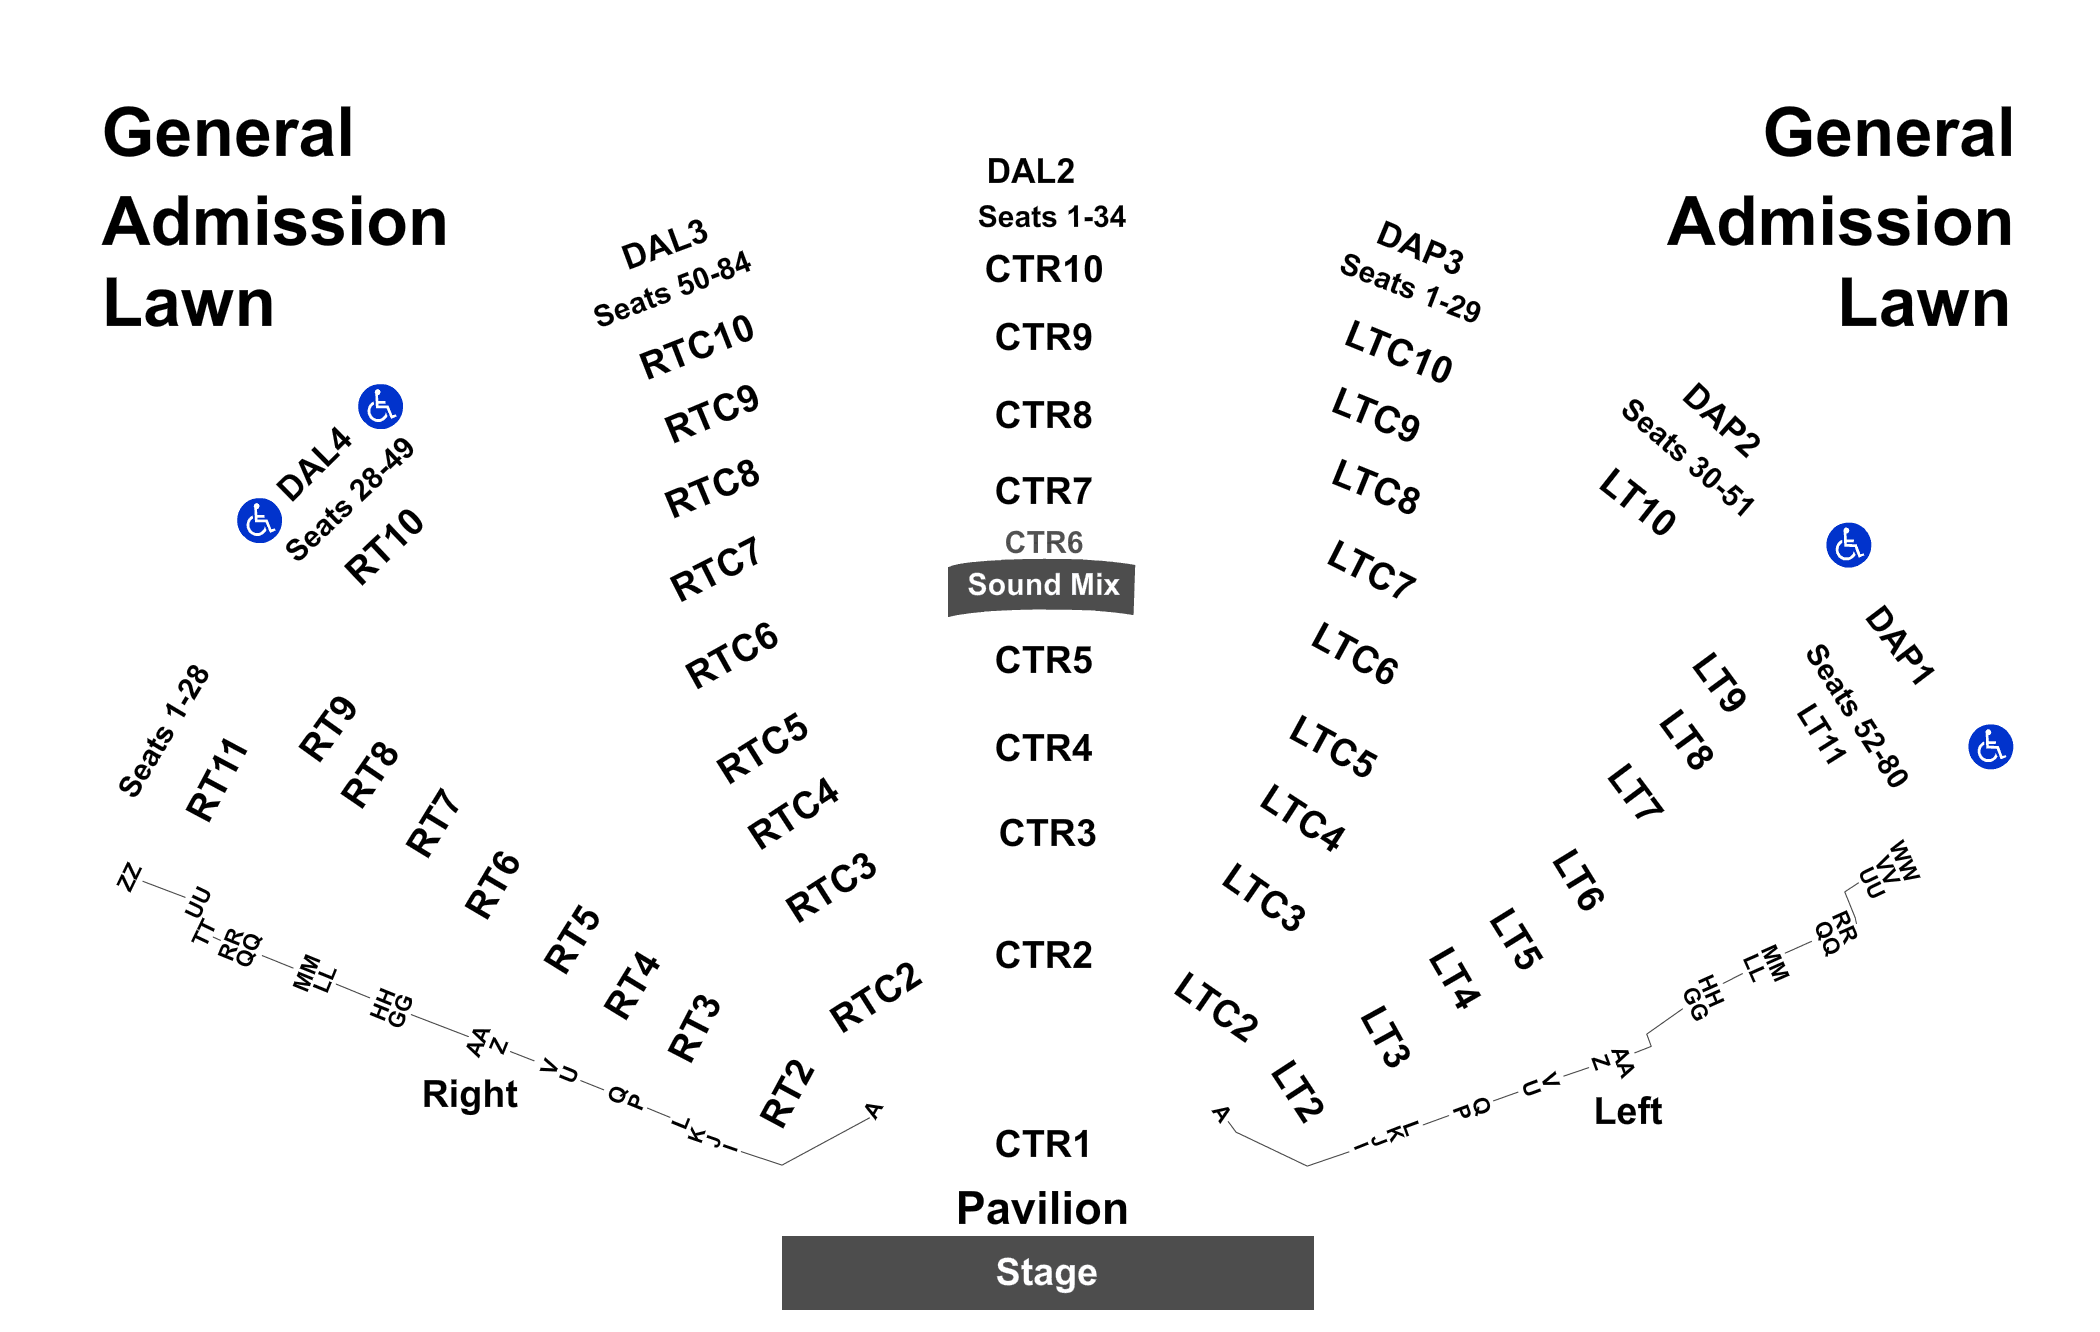 Dte Energy Clarkston Seating Chart